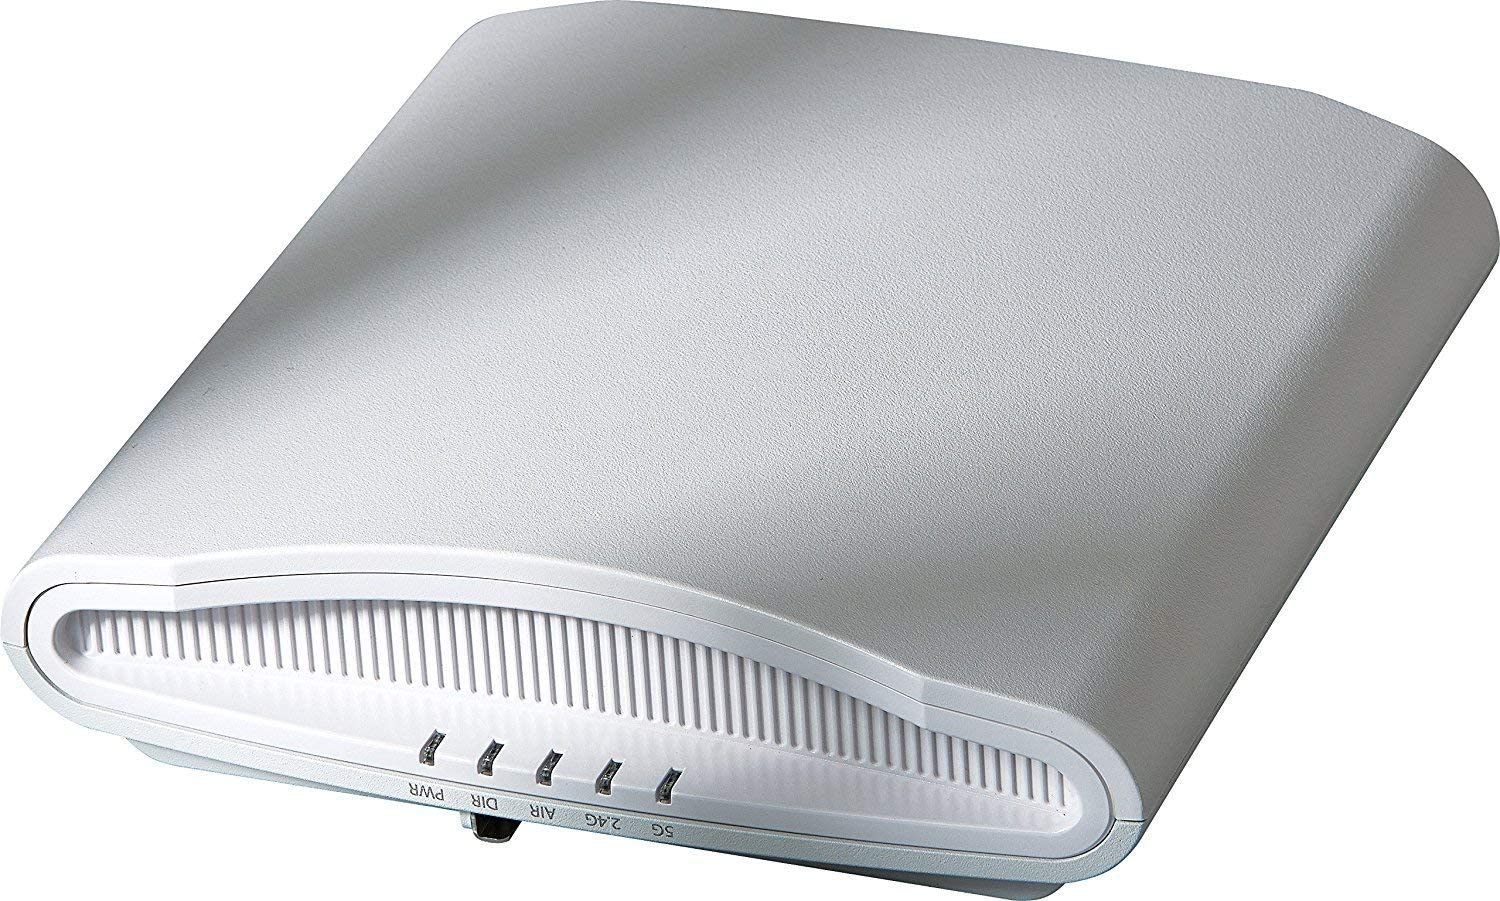 Ruckus Wireless ZoneFlex R710 UNLEASHED Dual-Band 2.4GHz and 5Ghz- 802